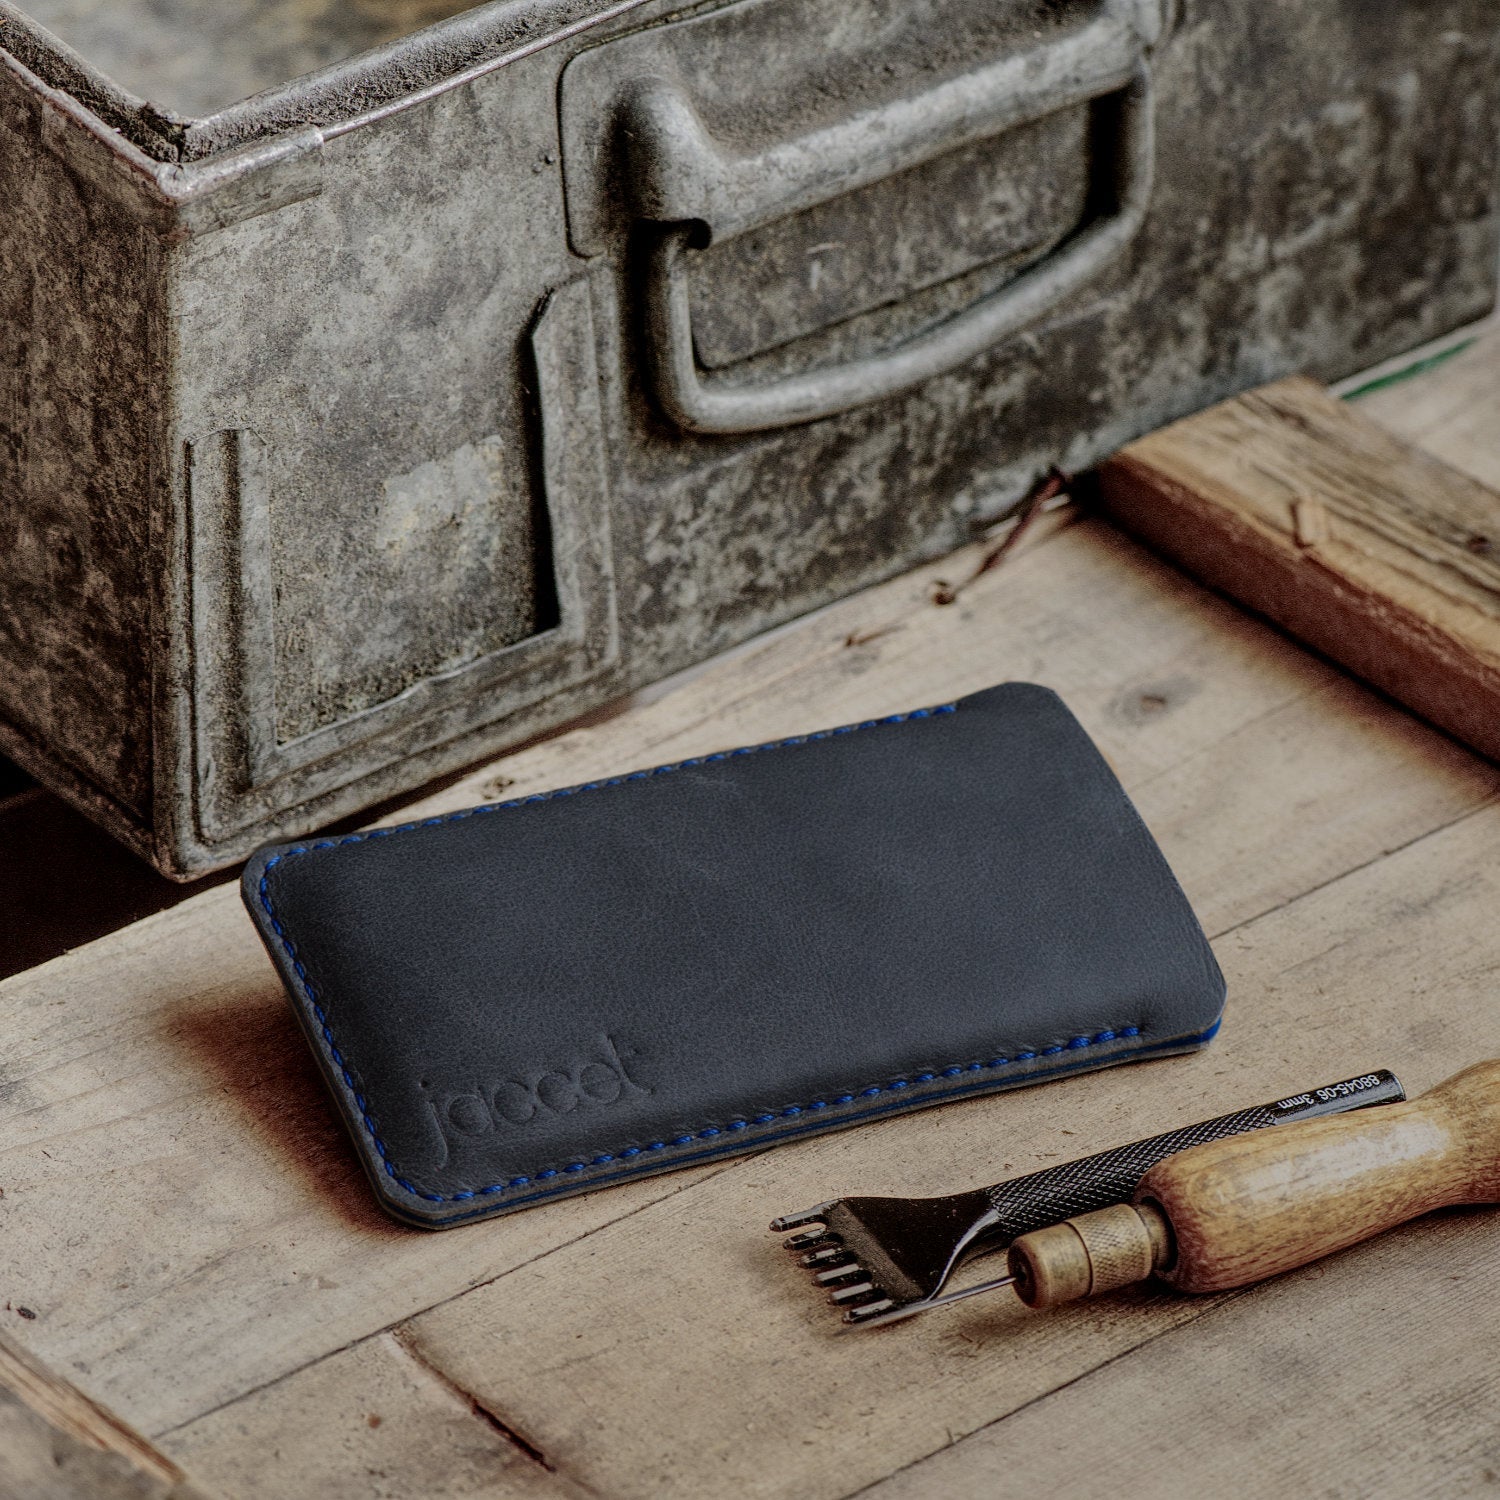 JACCET leather Sony Xperia sleeve - anthracite/black leather with blue wool felt. 100% Handmade